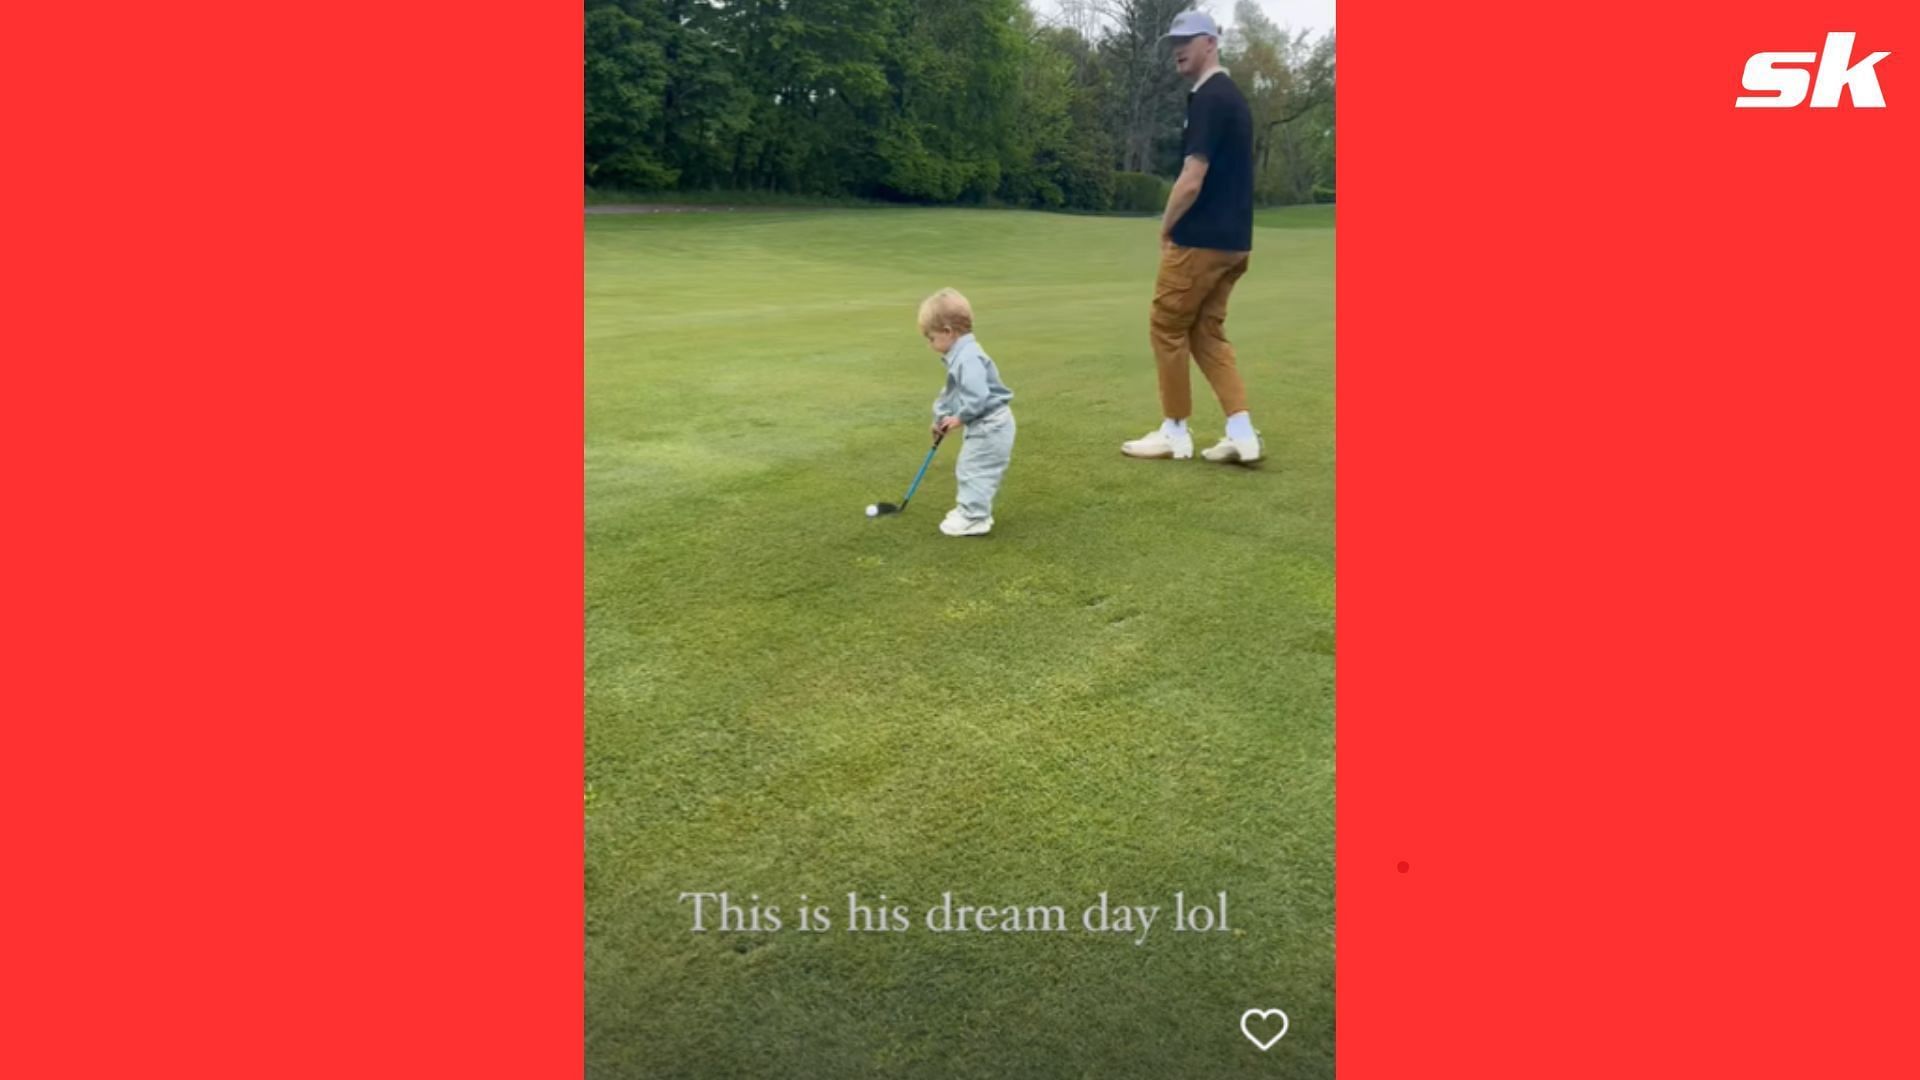 Maria Hader captured her husband Josh and their son Lucas bonding over some golf